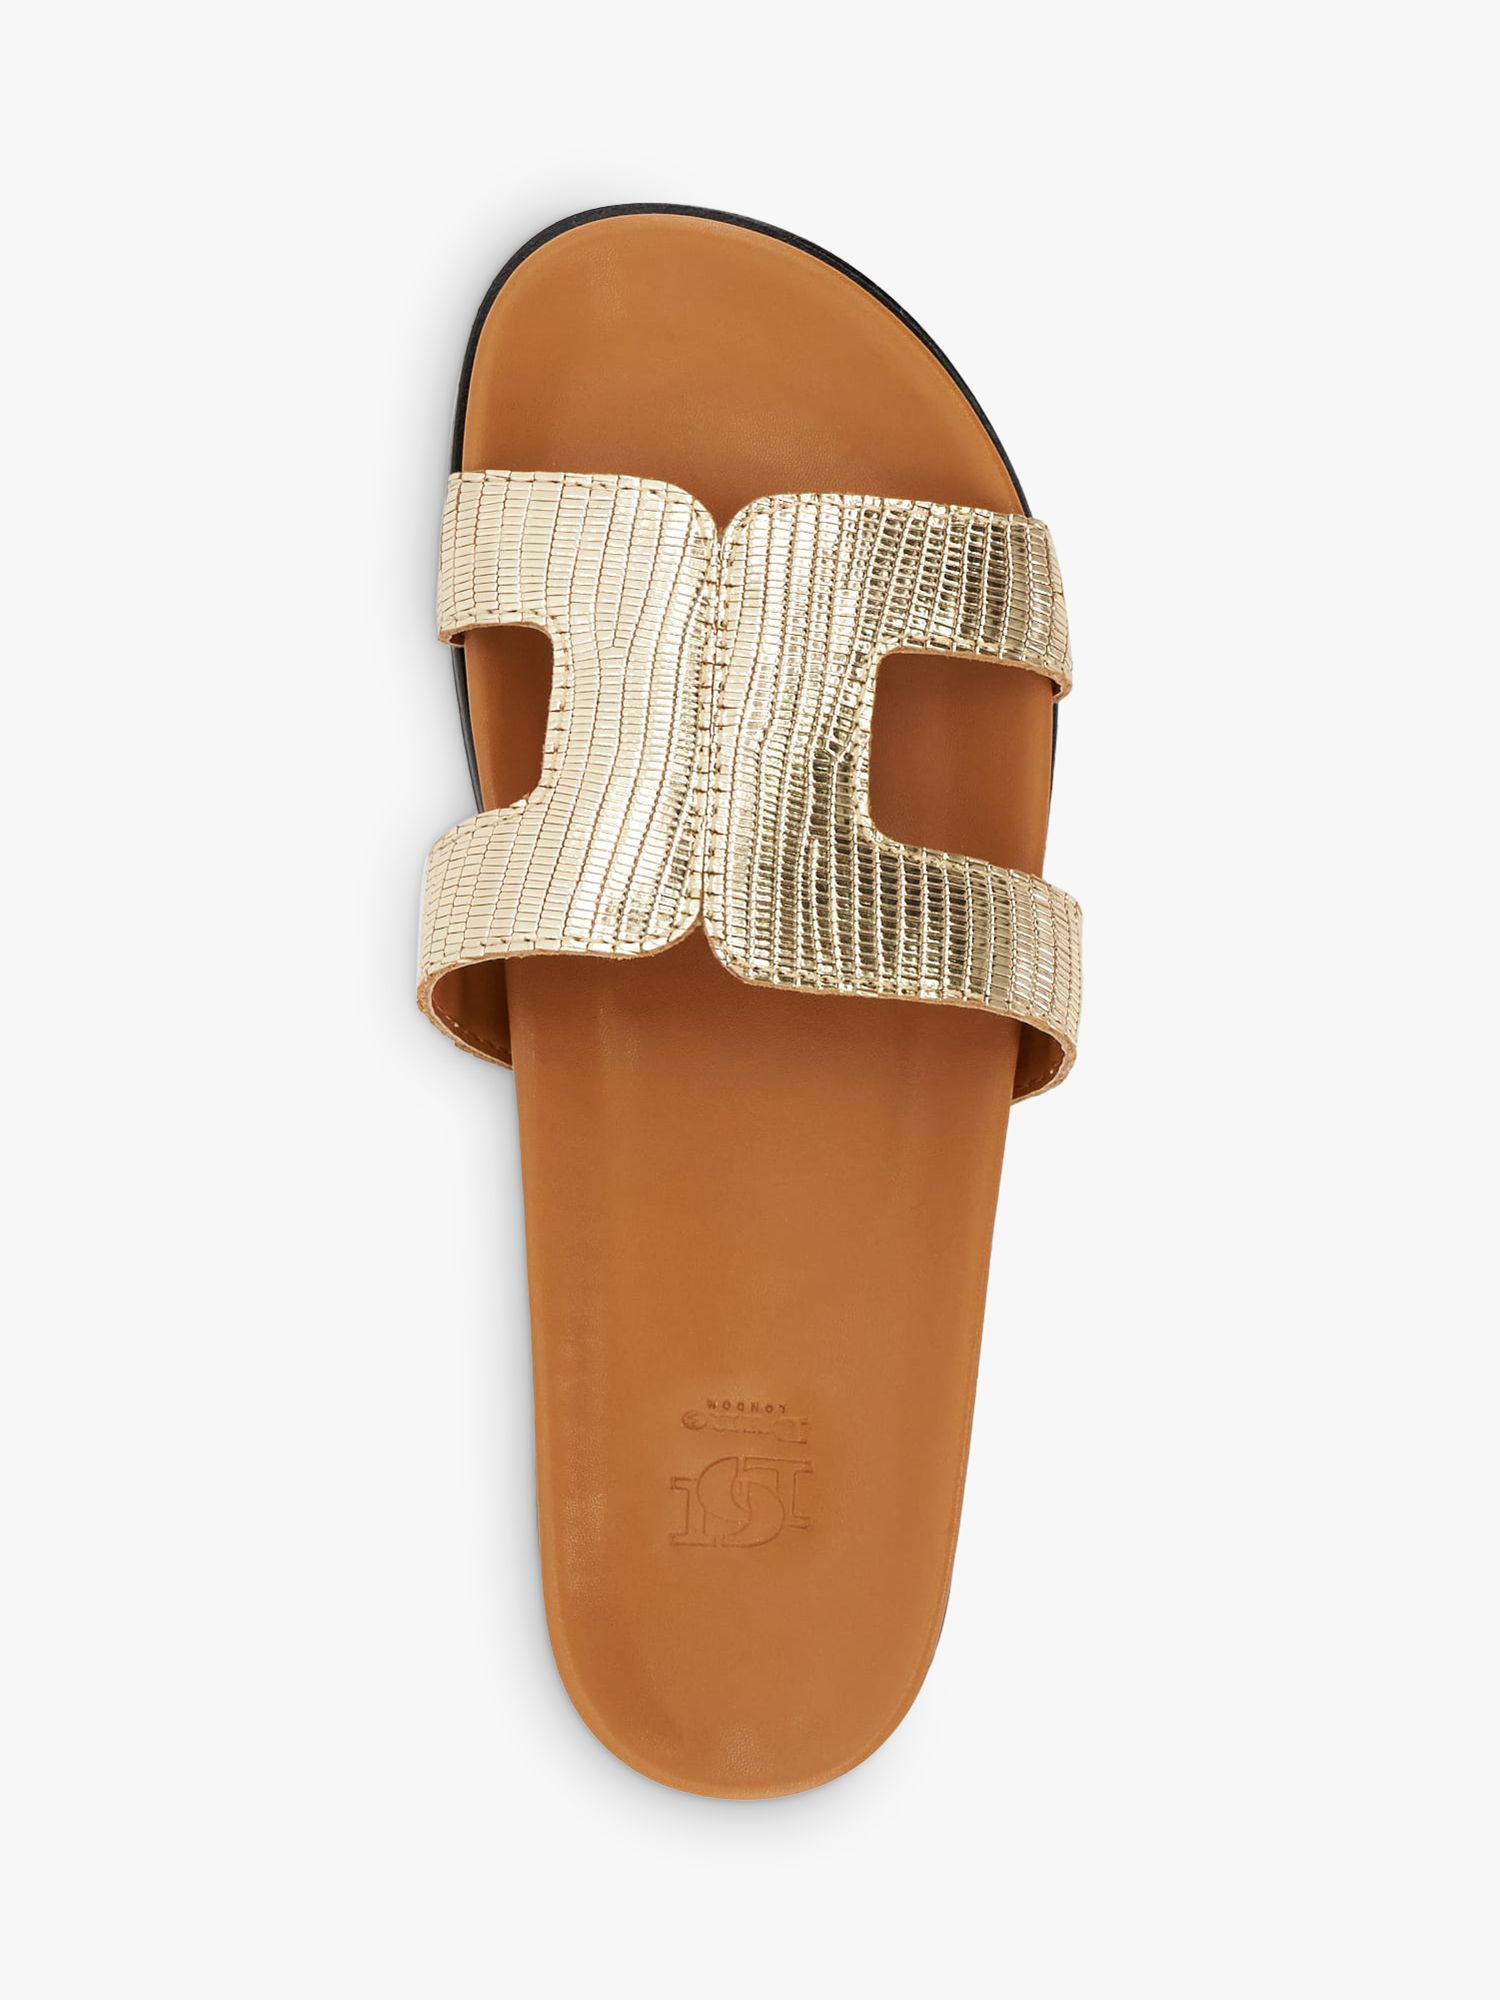 Buy Dune Loupa Leather Sandals, Gold Online at johnlewis.com